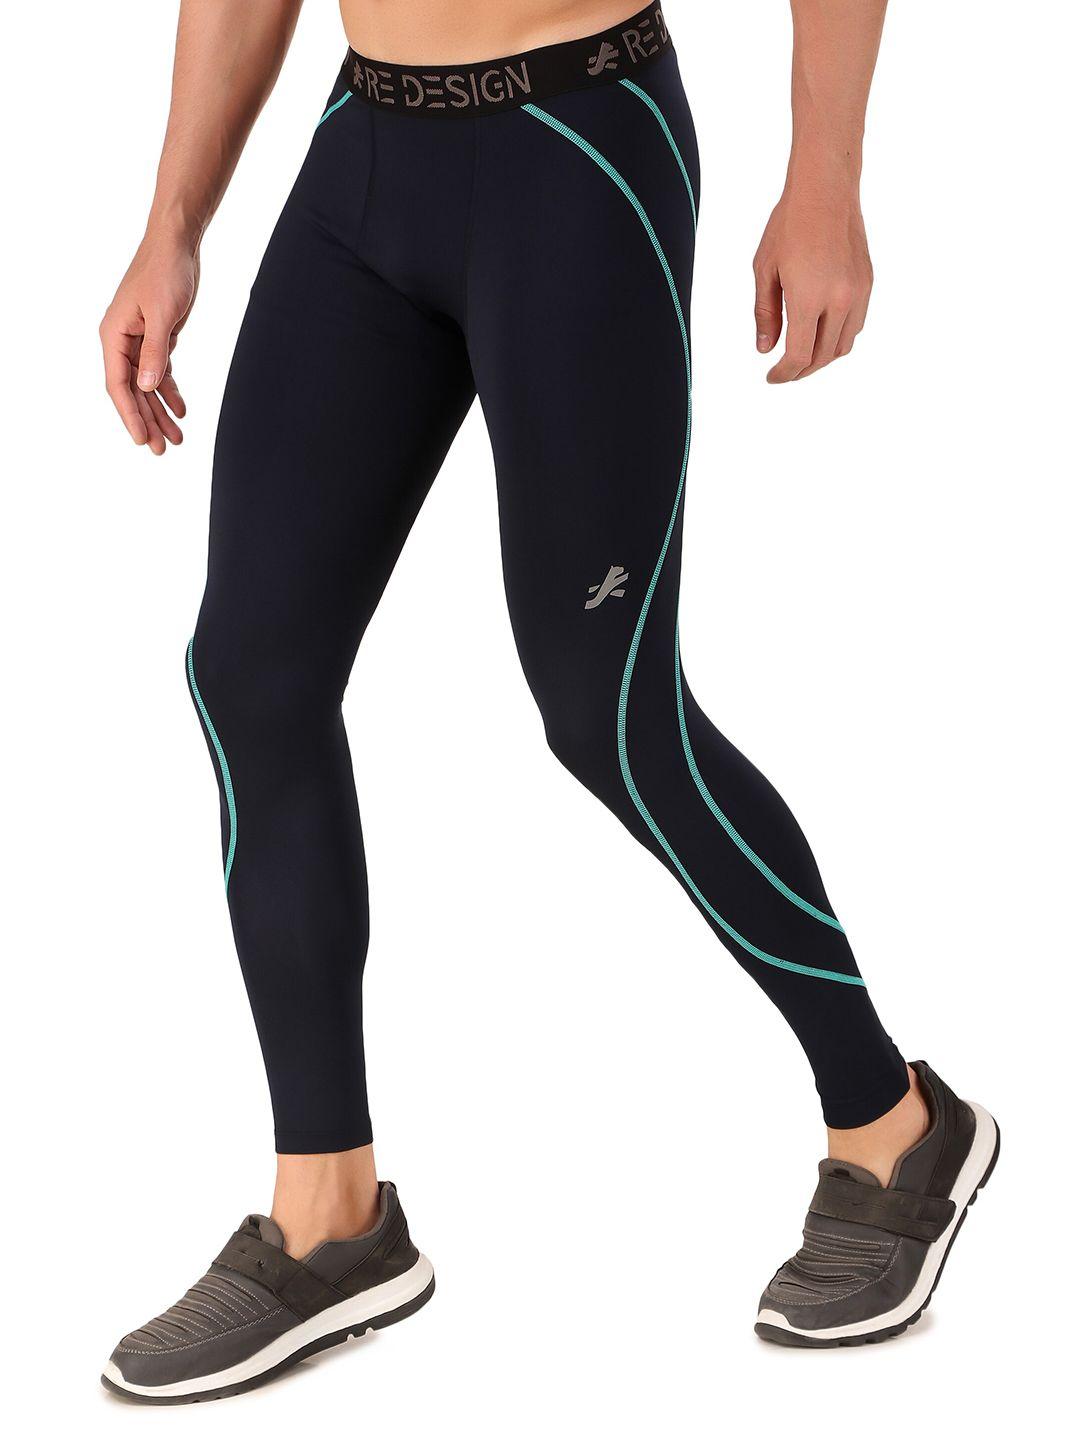 redesign men slim-fit ankle-length rapid dry sports tights